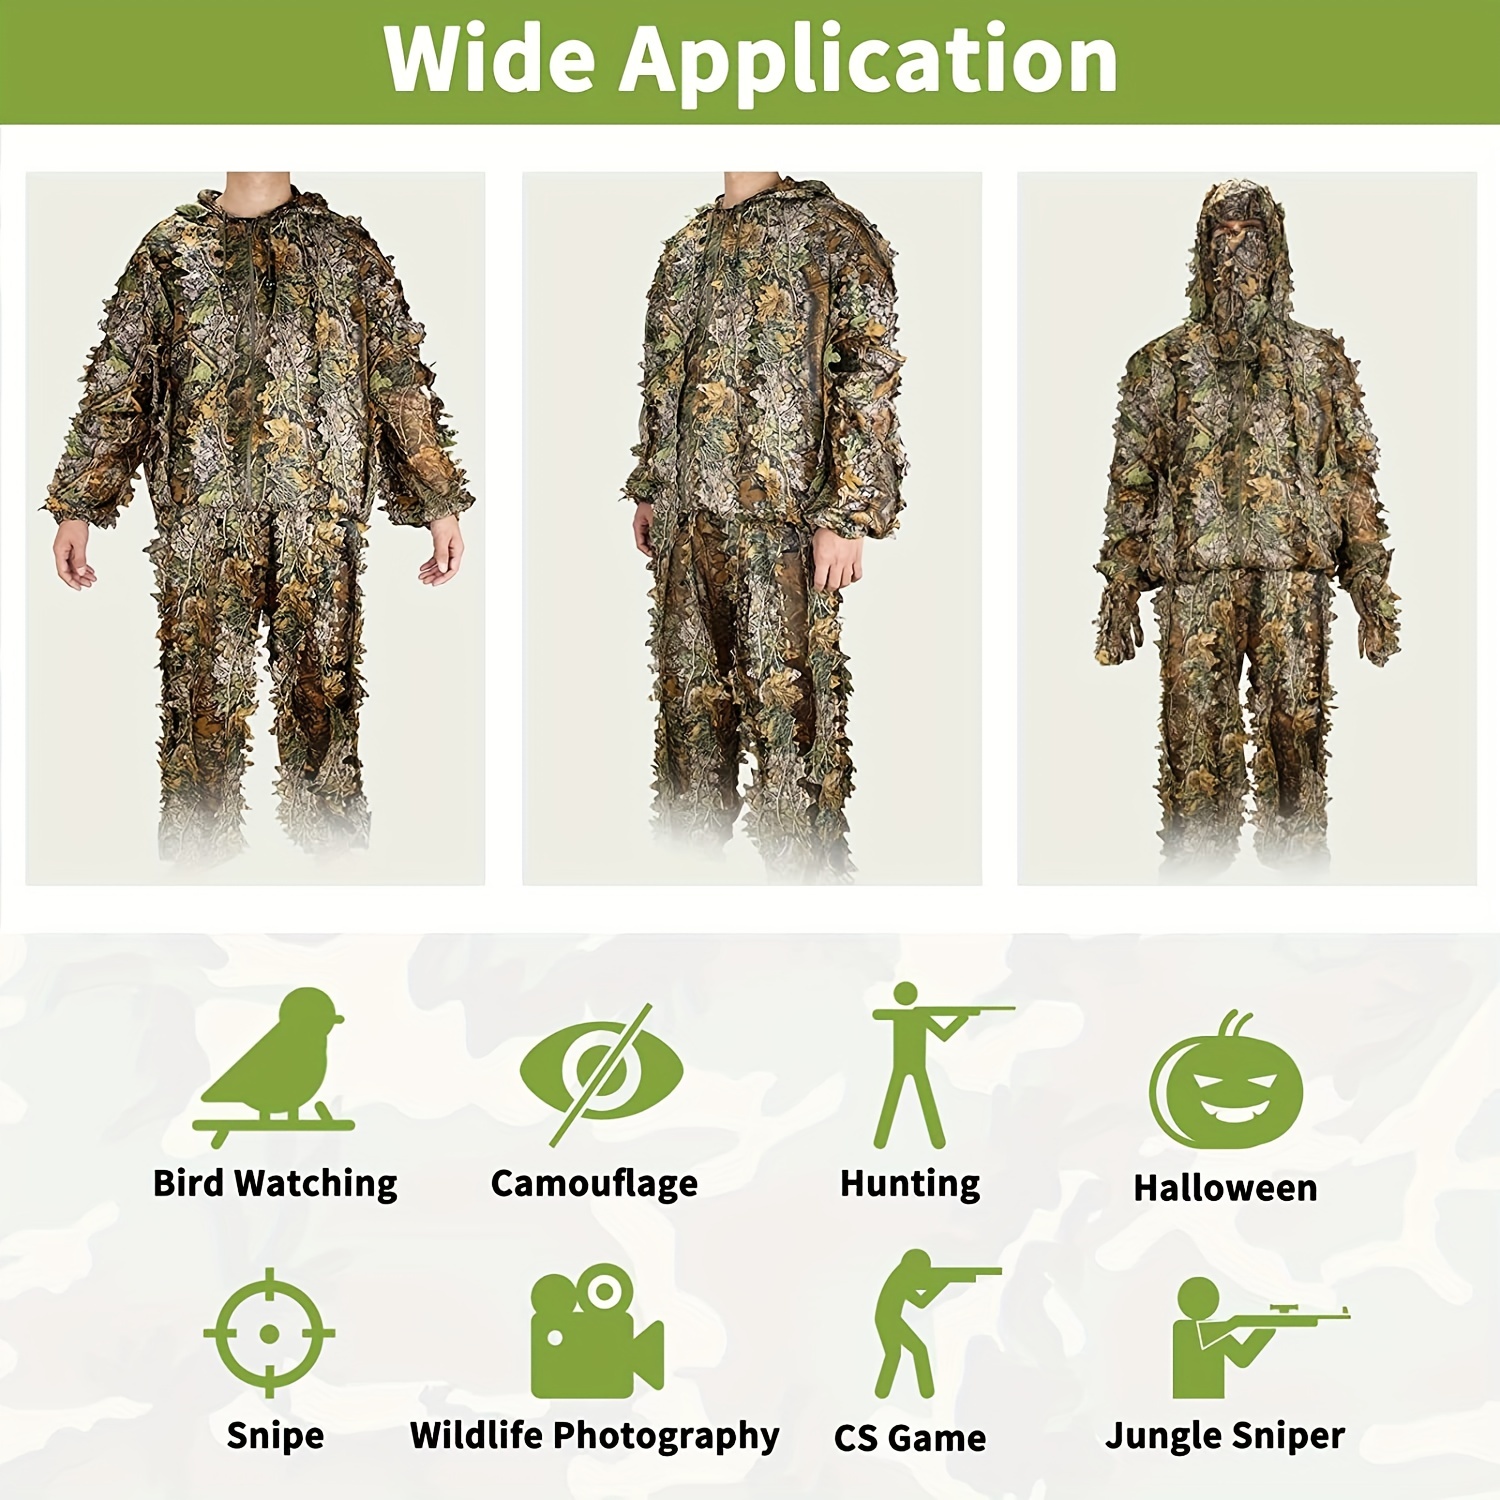 Lightweight Camouflage Hunting Suit With Hood - Stay Hidden And Comfortable  During Your Hunt